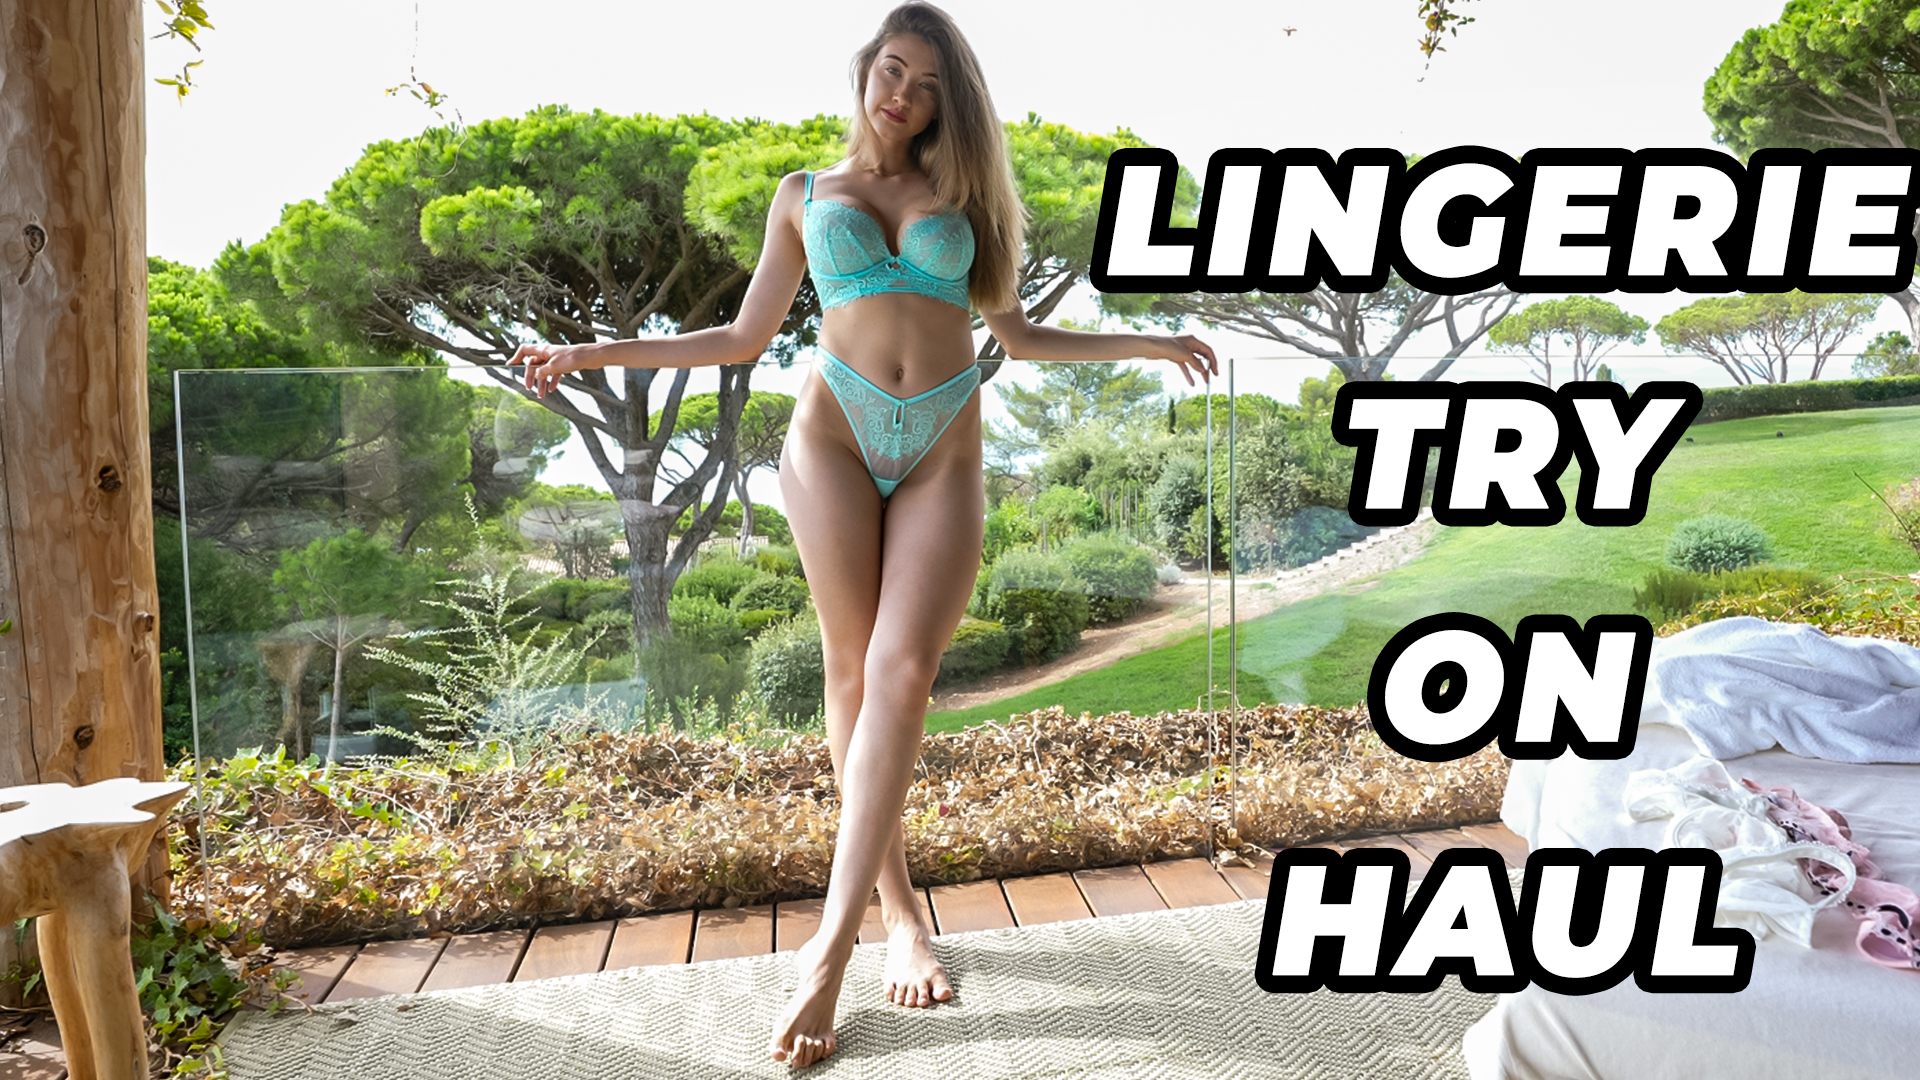 KatiaBang on X: Go watch my new video  KatiaBang Lingerie Try On Haul   New Lingeries Haul #3 [4K] '' now on my  channel! #lingerie  #lingerietryon #lingeriesets    /